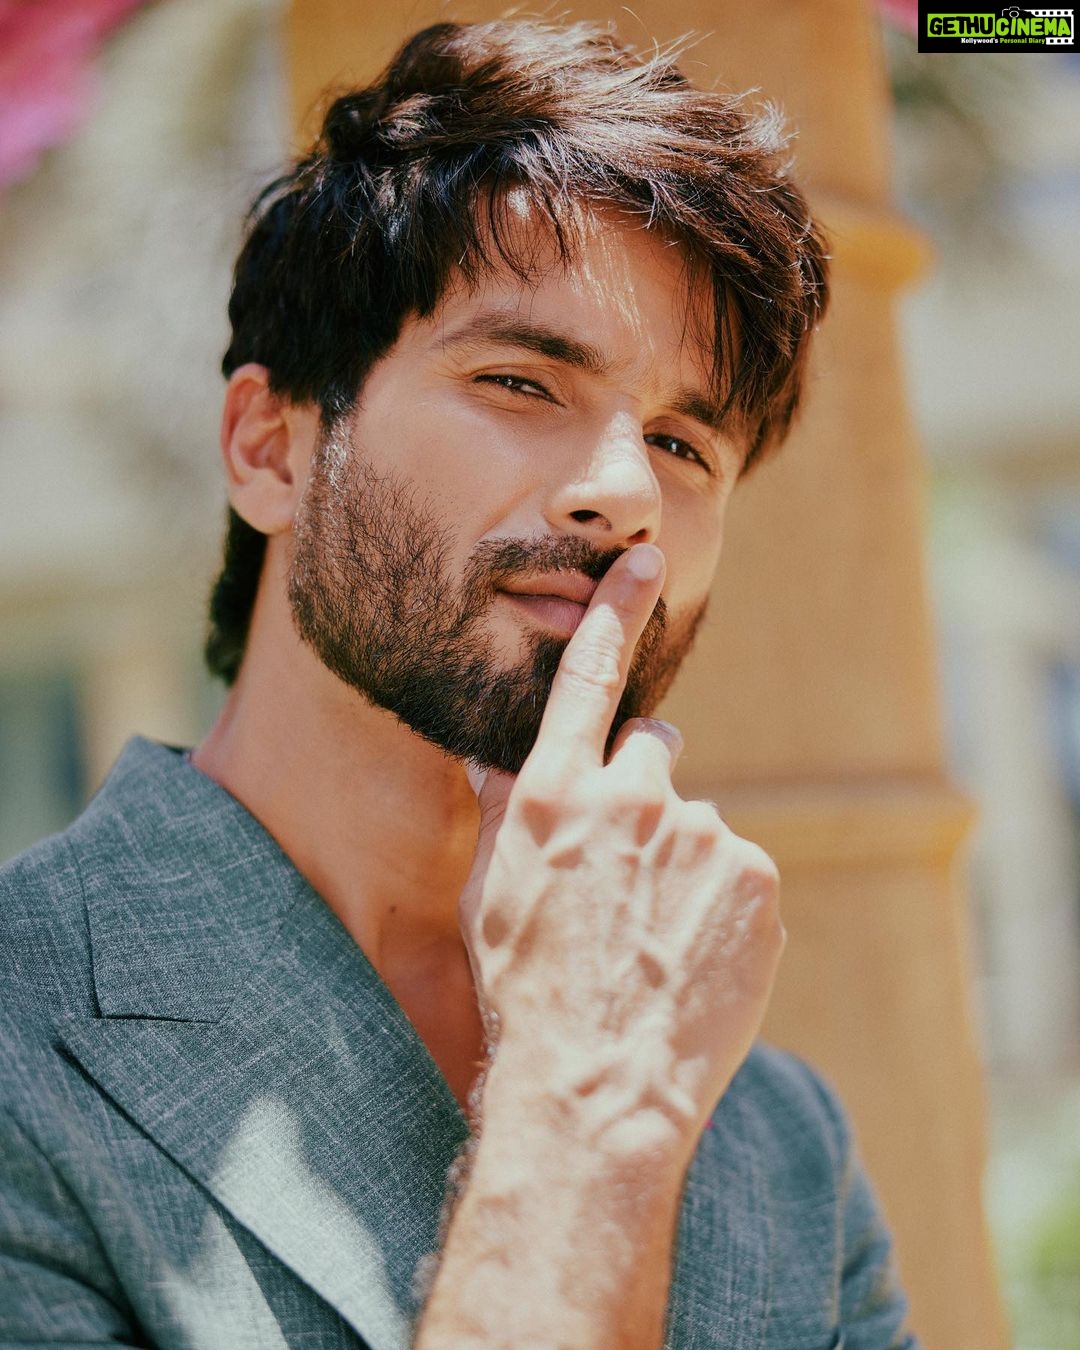 Shahid Kapoor HD Wallpapers | Latest Shahid Kapoor Wallpapers HD Free  Download (1080p to 2K) - FilmiBeat